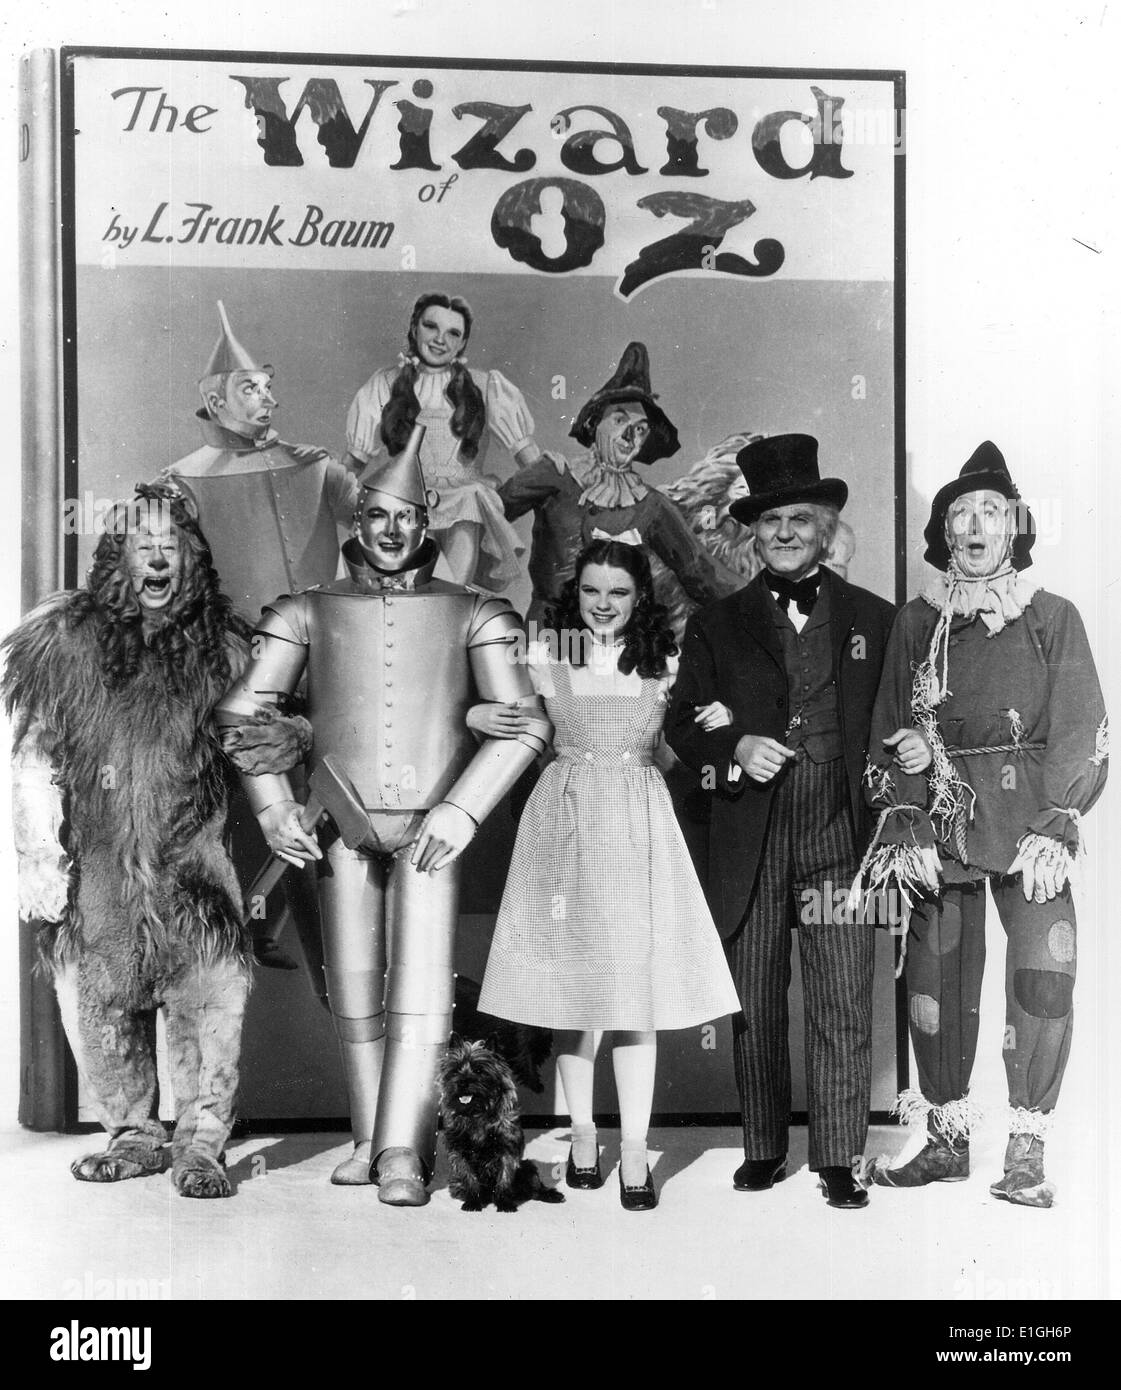 The Wizard of Oz is a 1939 American musical fantasy film produced by  Metro-Goldwyn-Mayer, and the most well-known and commercially successful  adaptation based on the 1900 novel The Wonderful Wizard of Oz